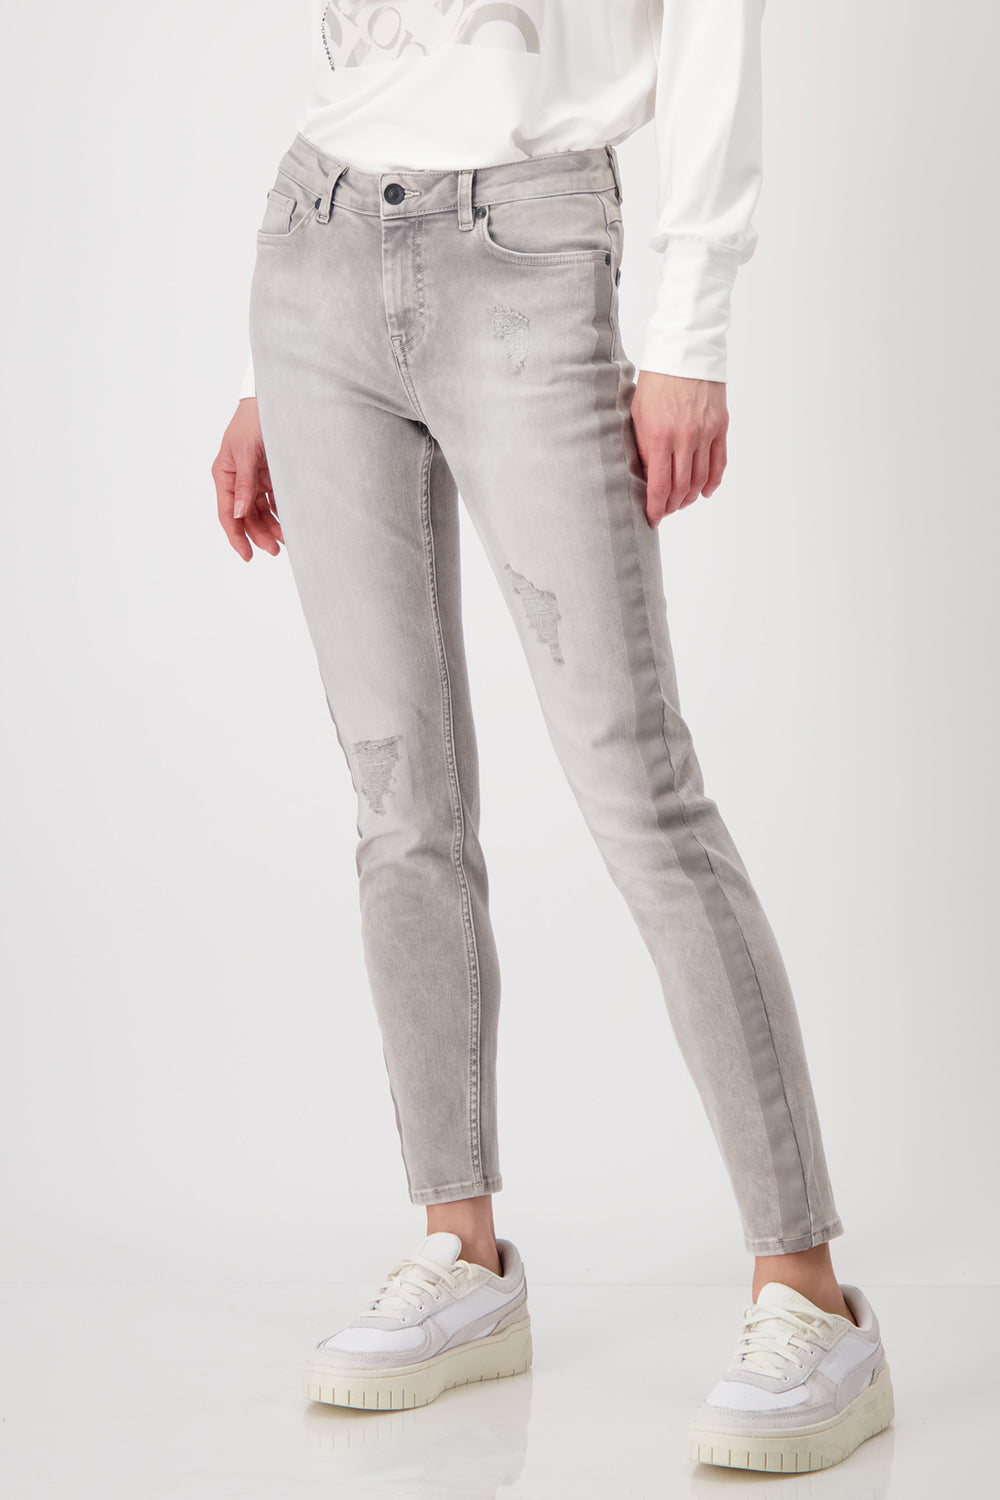 Monari Trousers Jeans Fade Out 807349 - Pre Order April Delivery